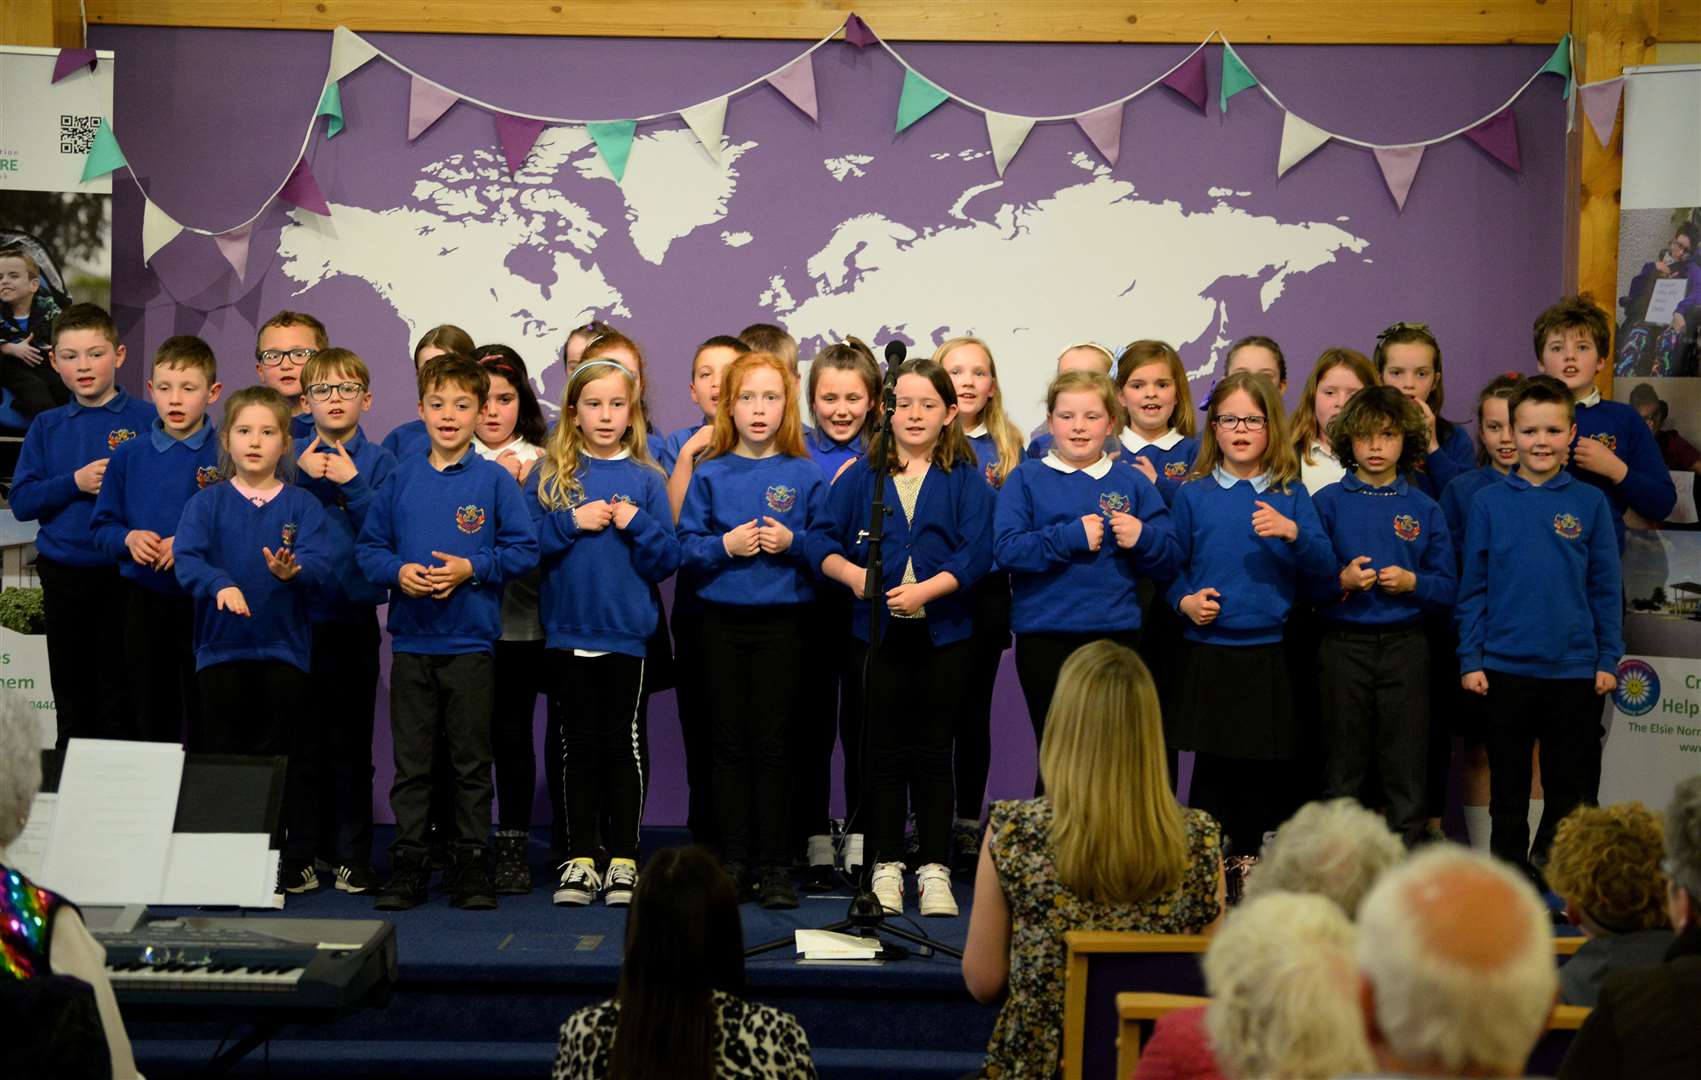 Words and actions from Smithton Primary Sing and Sign at the Big Spring Sing fundraising concert for the Haven Centre project.